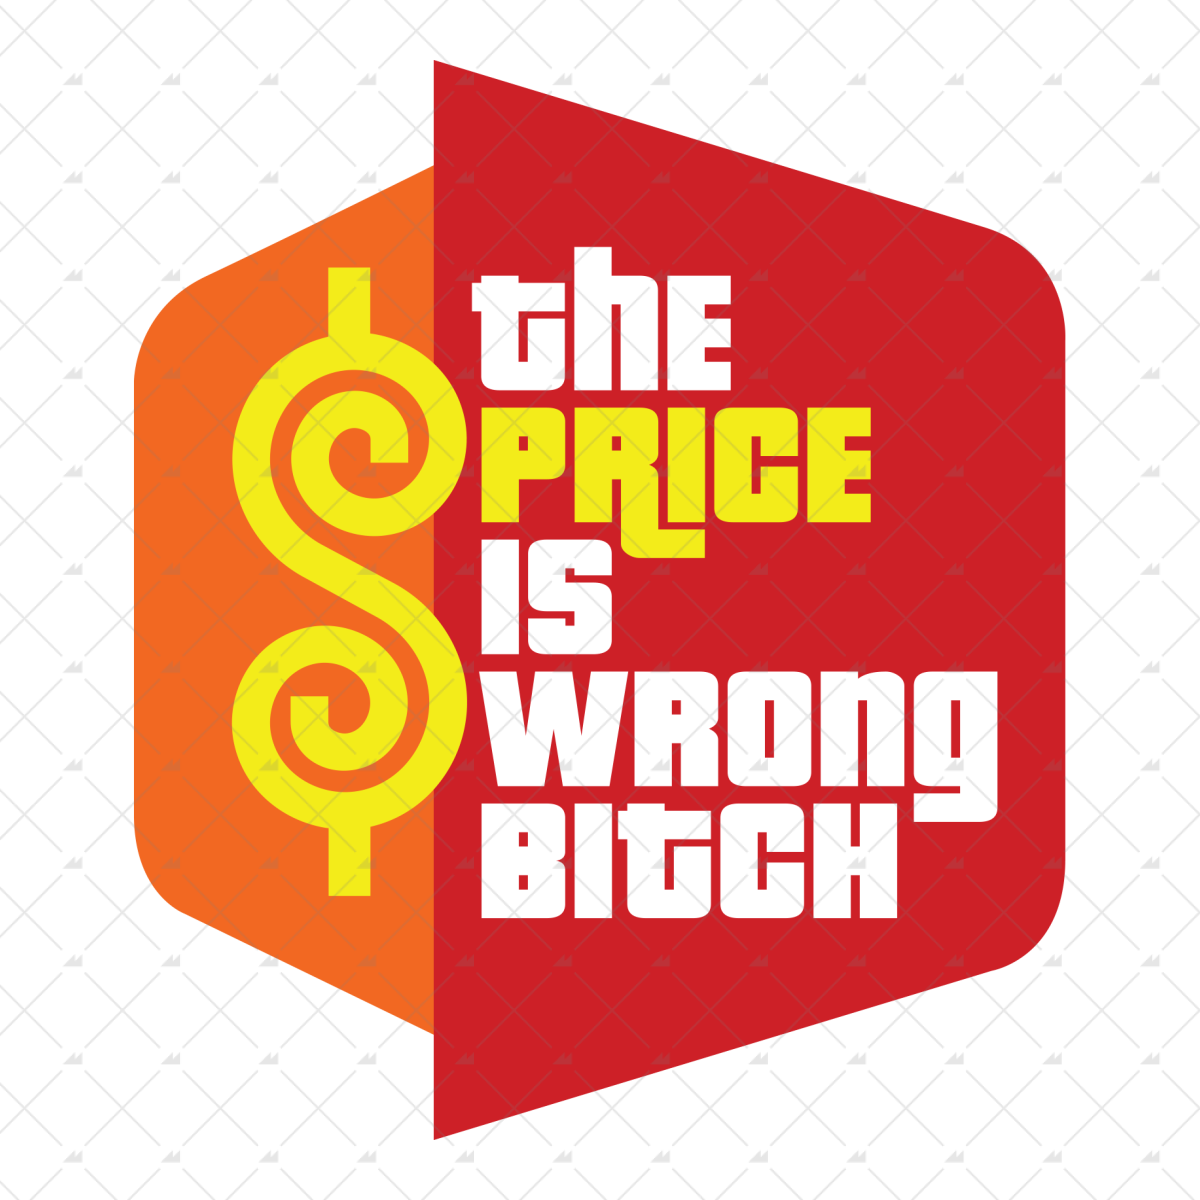 The Price is Wrong Bitch - Sticker